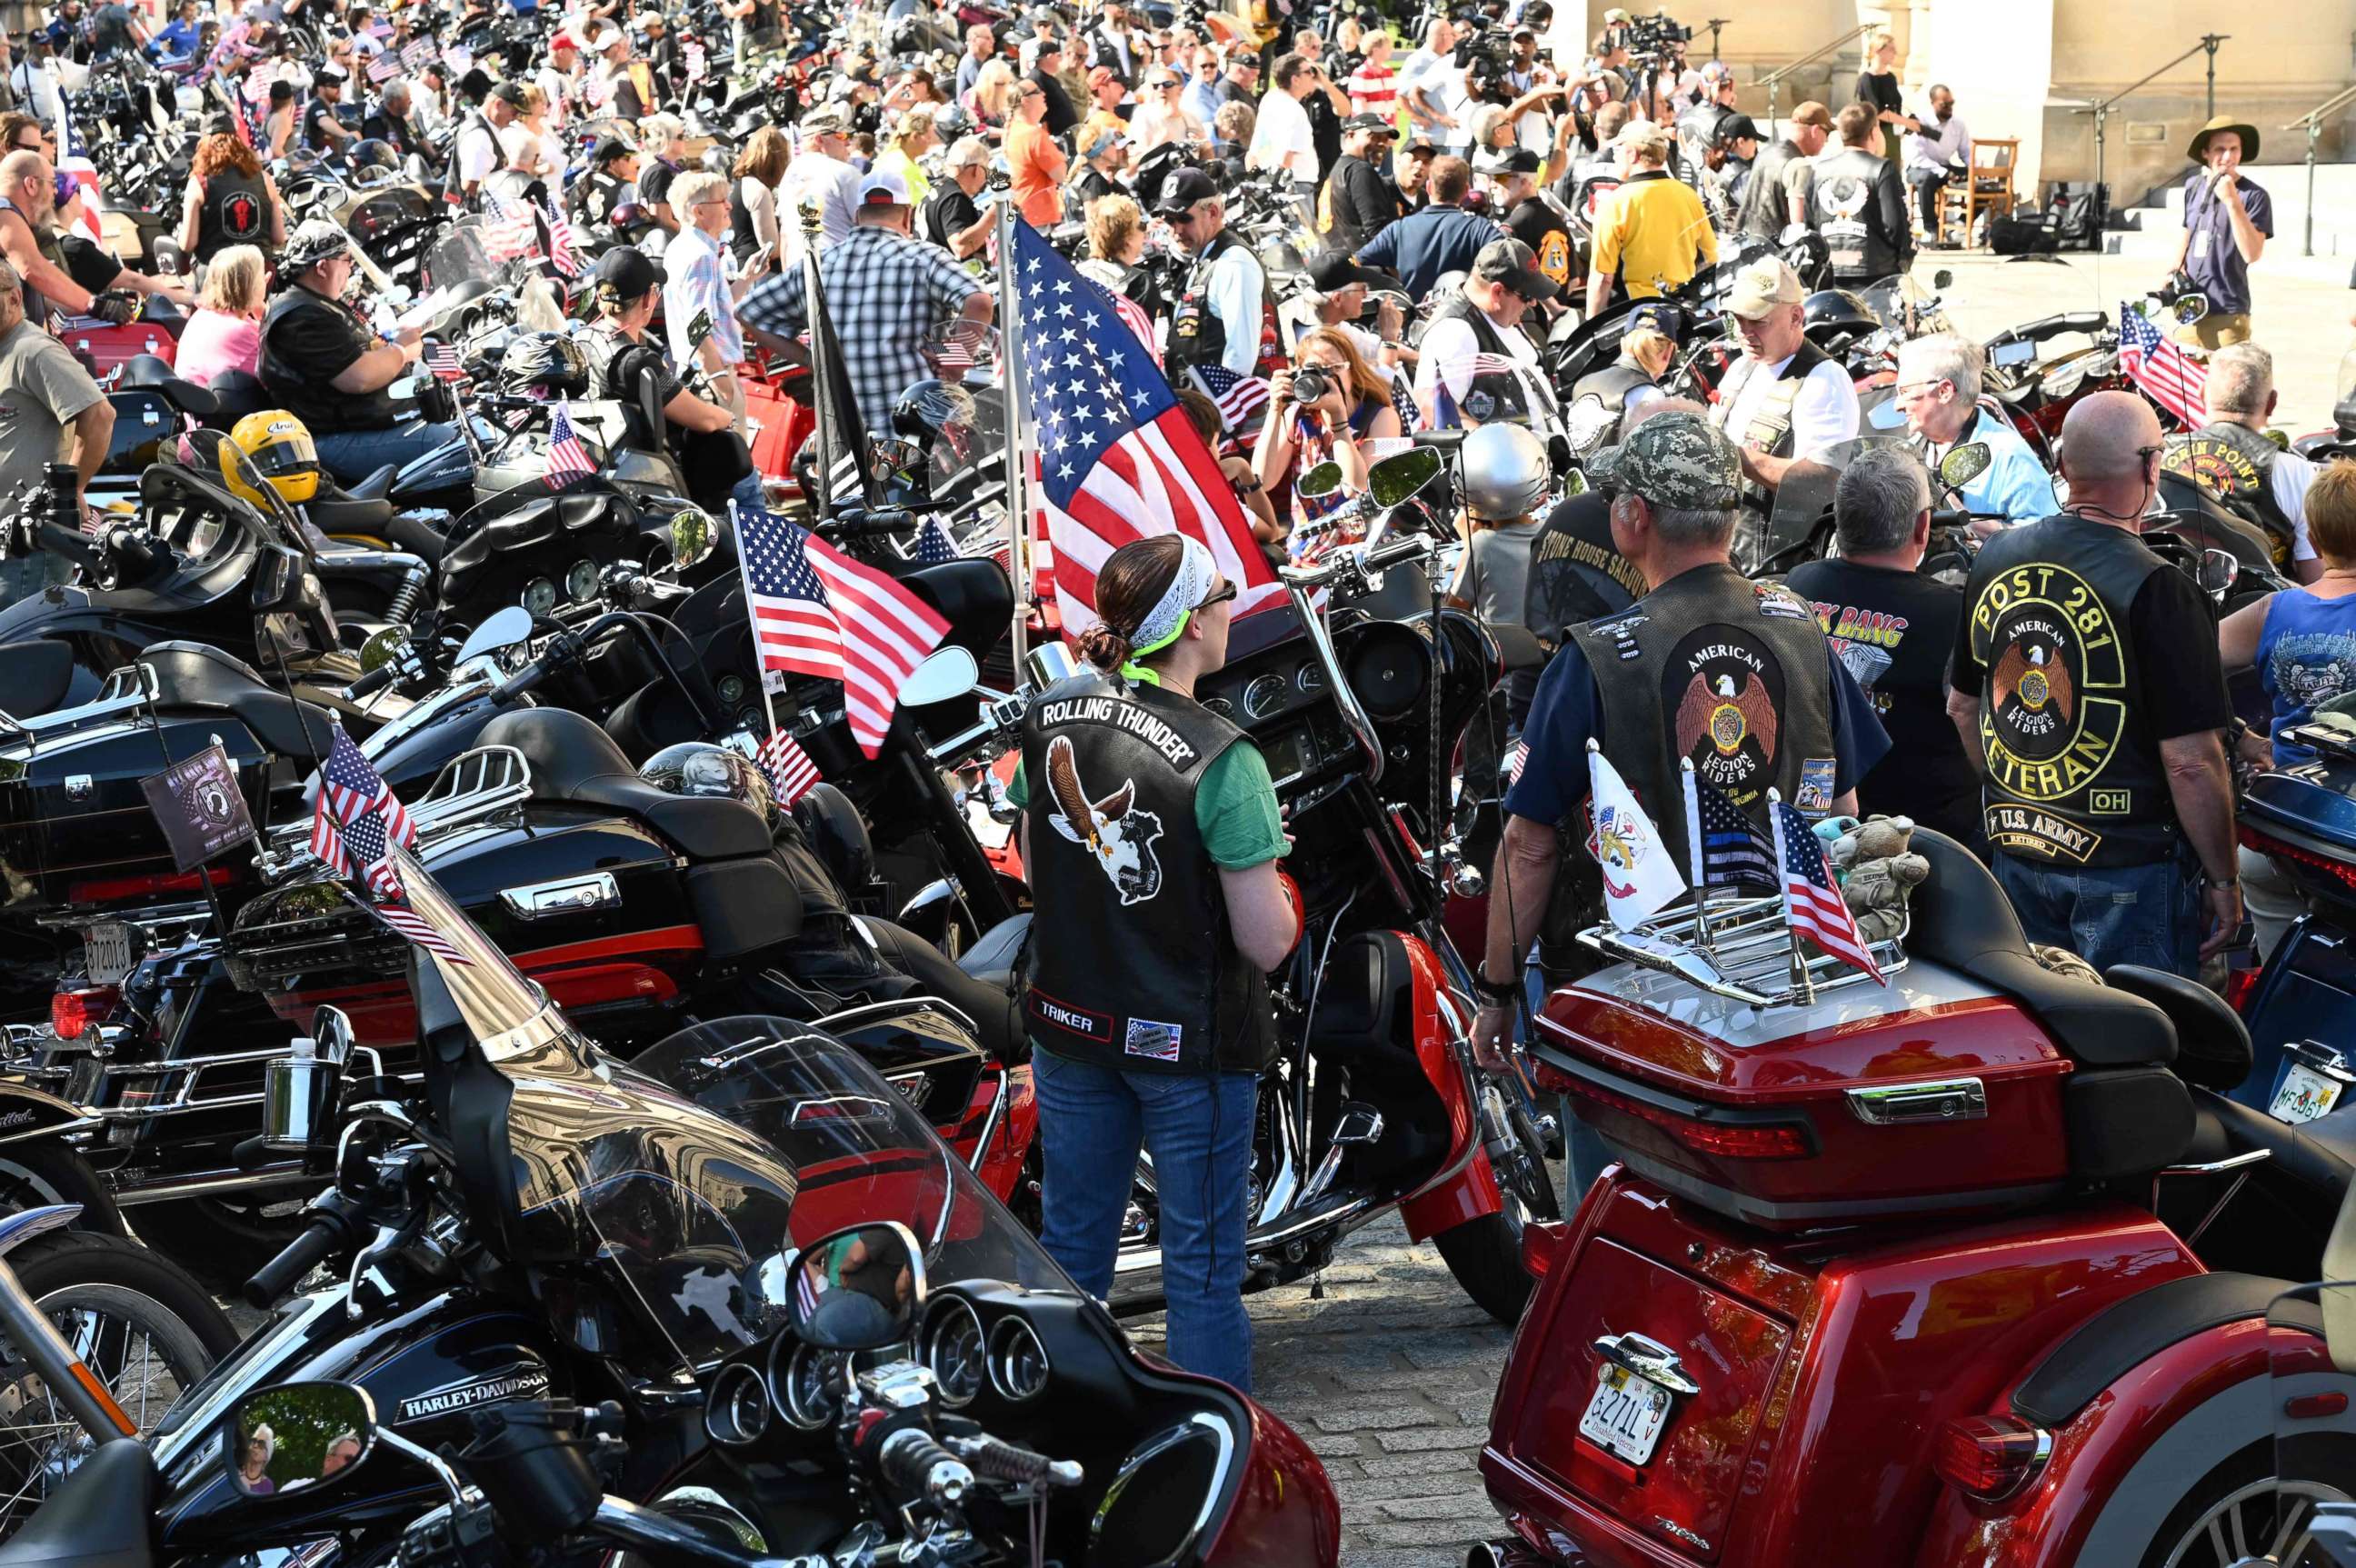 PHOTO: A crowd of motorcyclists is gathered at the Washington National Cathedral for the "Blessing of the Bikes," May 24, 2019, in Washington, D.C.